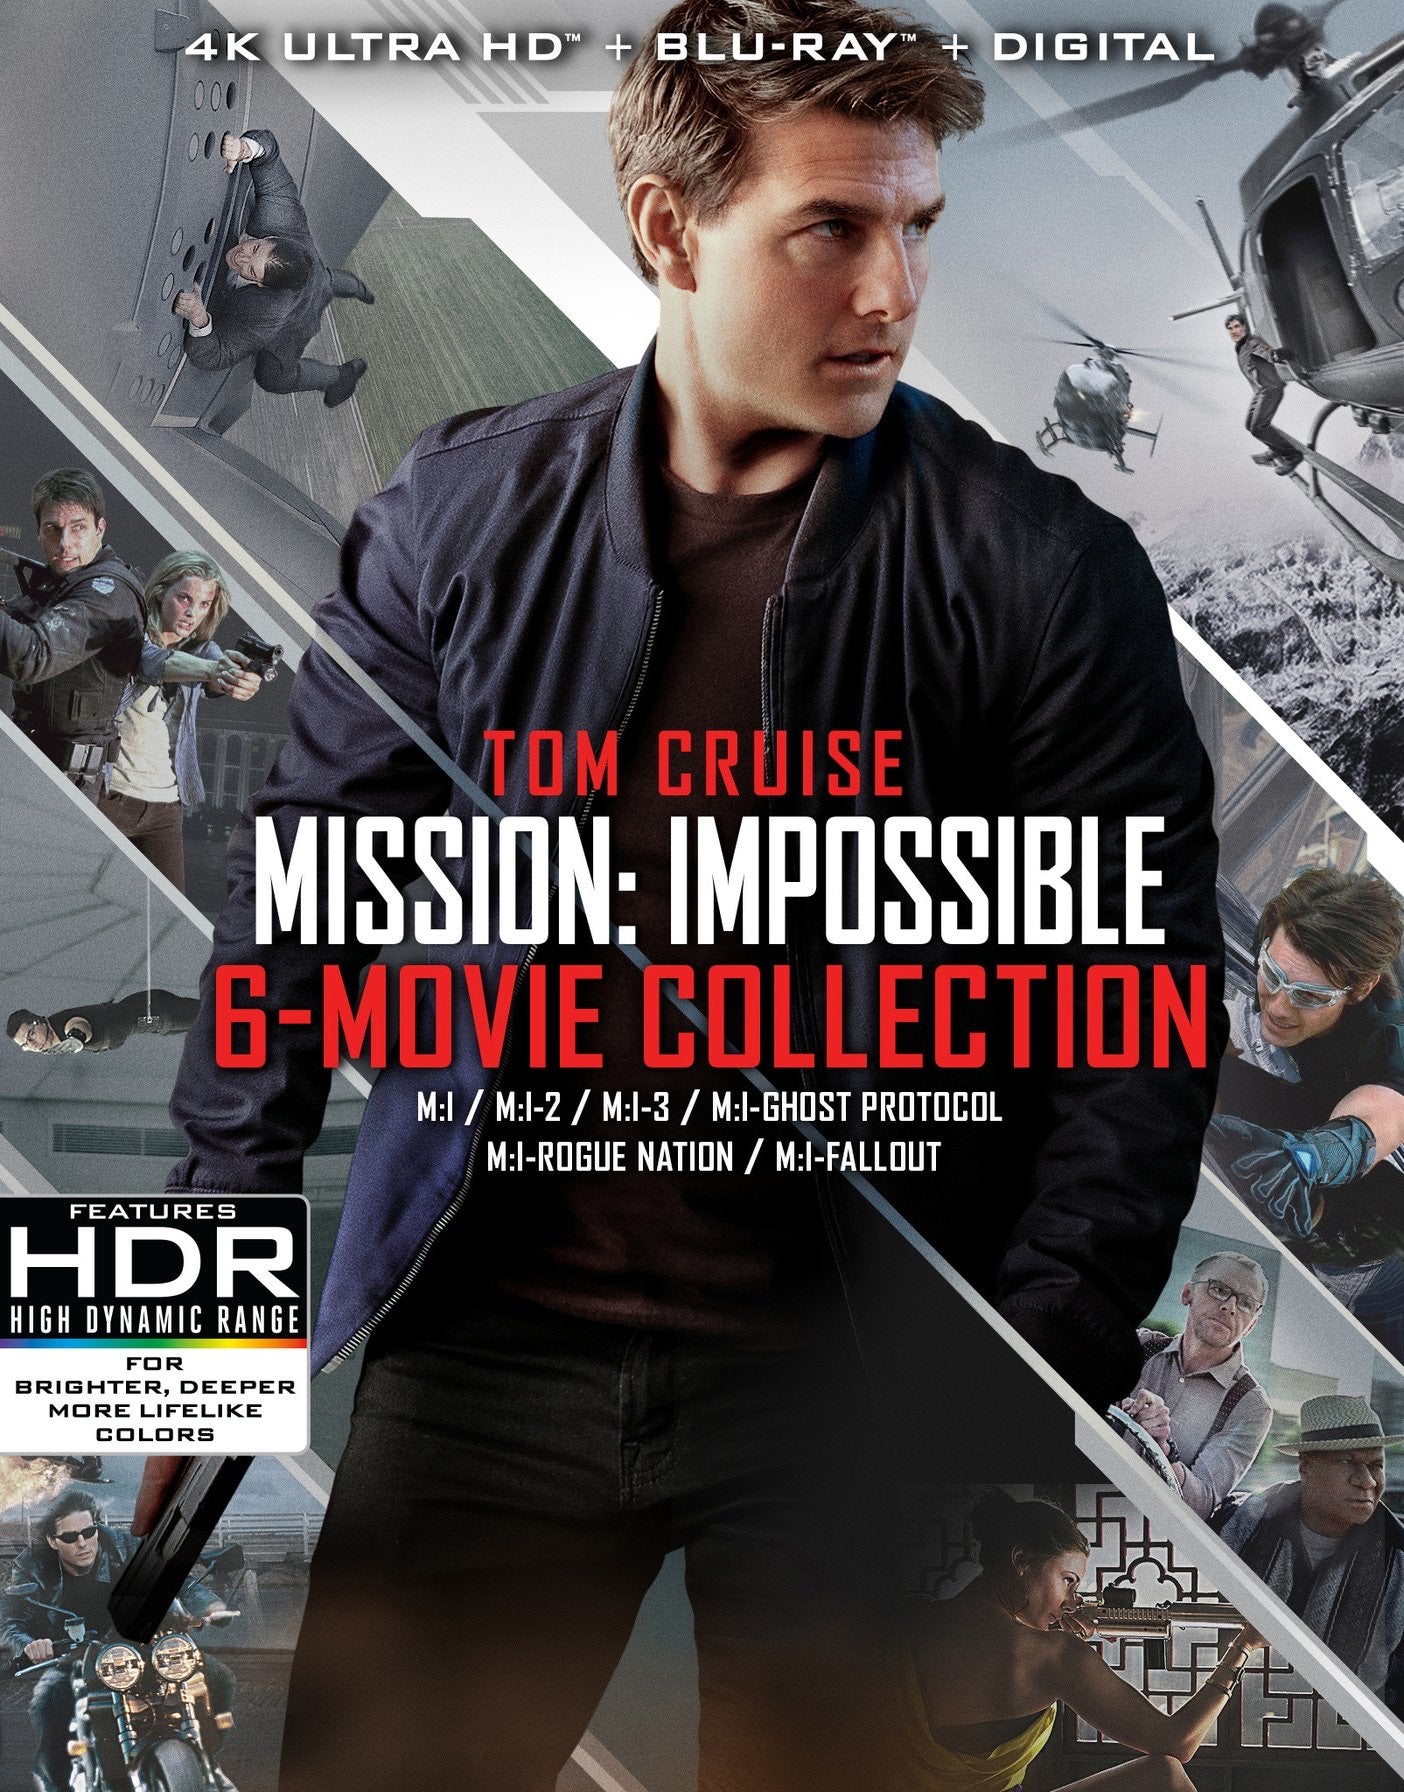 Mission Impossible: 6 Movie Collection iTunes 4K redemption only